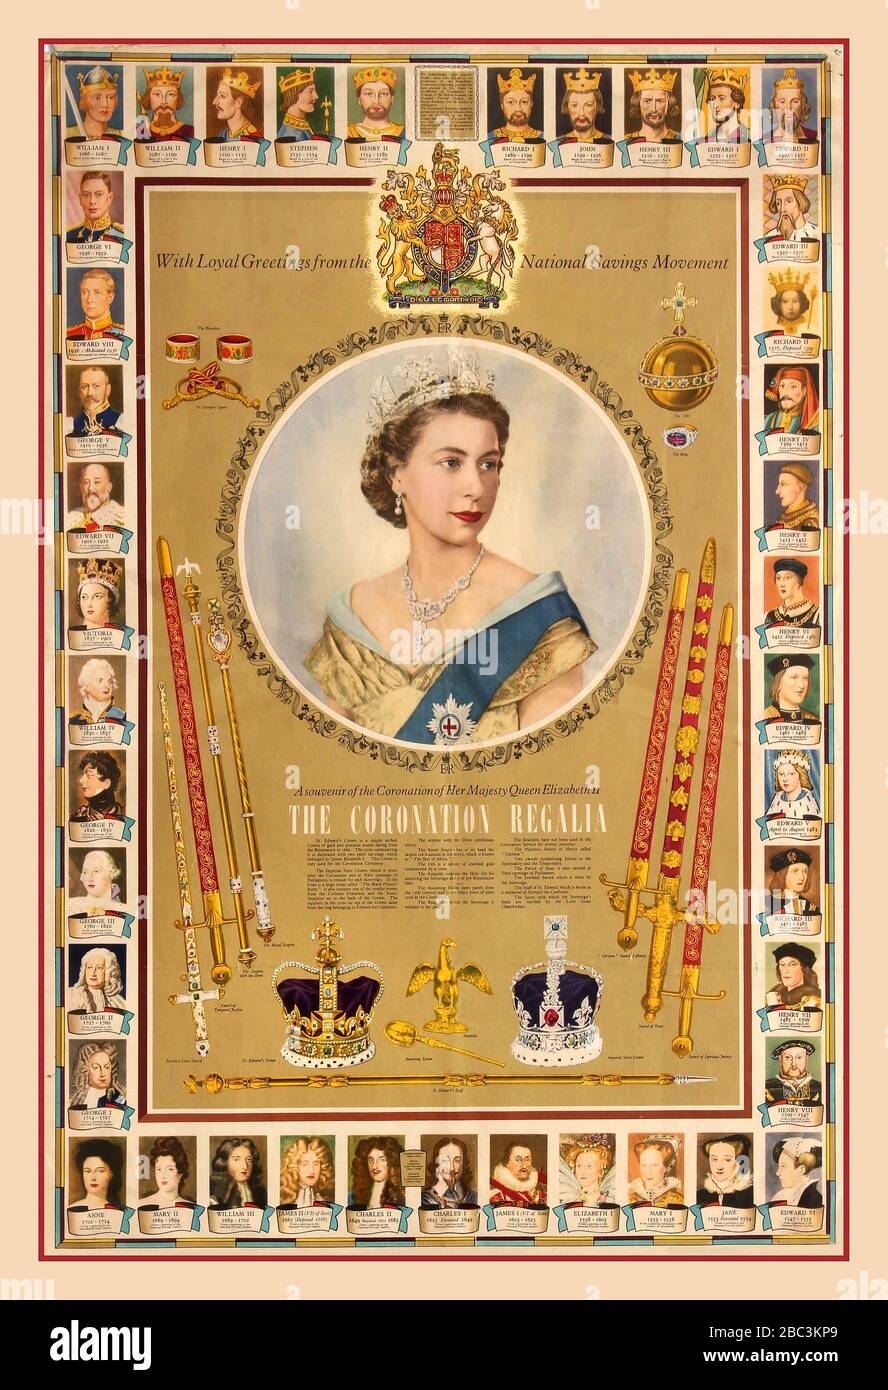 CORONATION REGALIA POSTER Vintage 1950s British information poster issued by the National Savings Committee as a souvenir of the Coronation of Her Majesty Queen Elizabeth II - The Coronation Regalia, on June 2, 1953. This poster features a portrait of Her Majesty Queen Elizabeth II with portraits of all of her predecessors displayed as a frieze on the margins of the poster. The poster also shows the two Crowns, Swords, Spurs, Bracelets, the Ring, the Orb, the Sceptre and the Staff that the Queen received during the Coronation ceremony. June 2 1953. Stock Photo